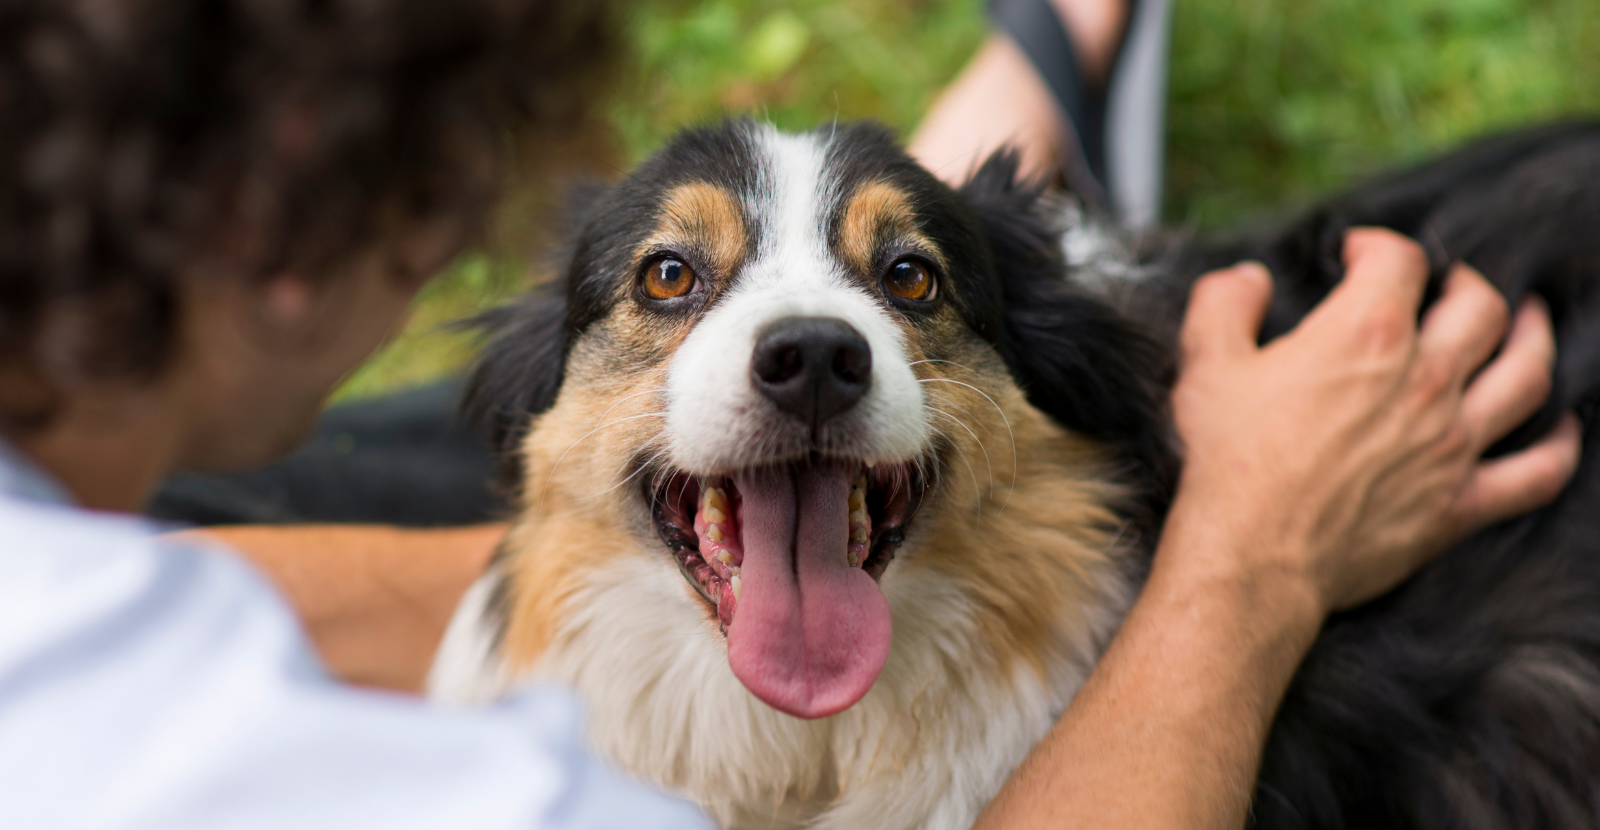 10 Ways Dogs Improve Our Mental & Physical Health